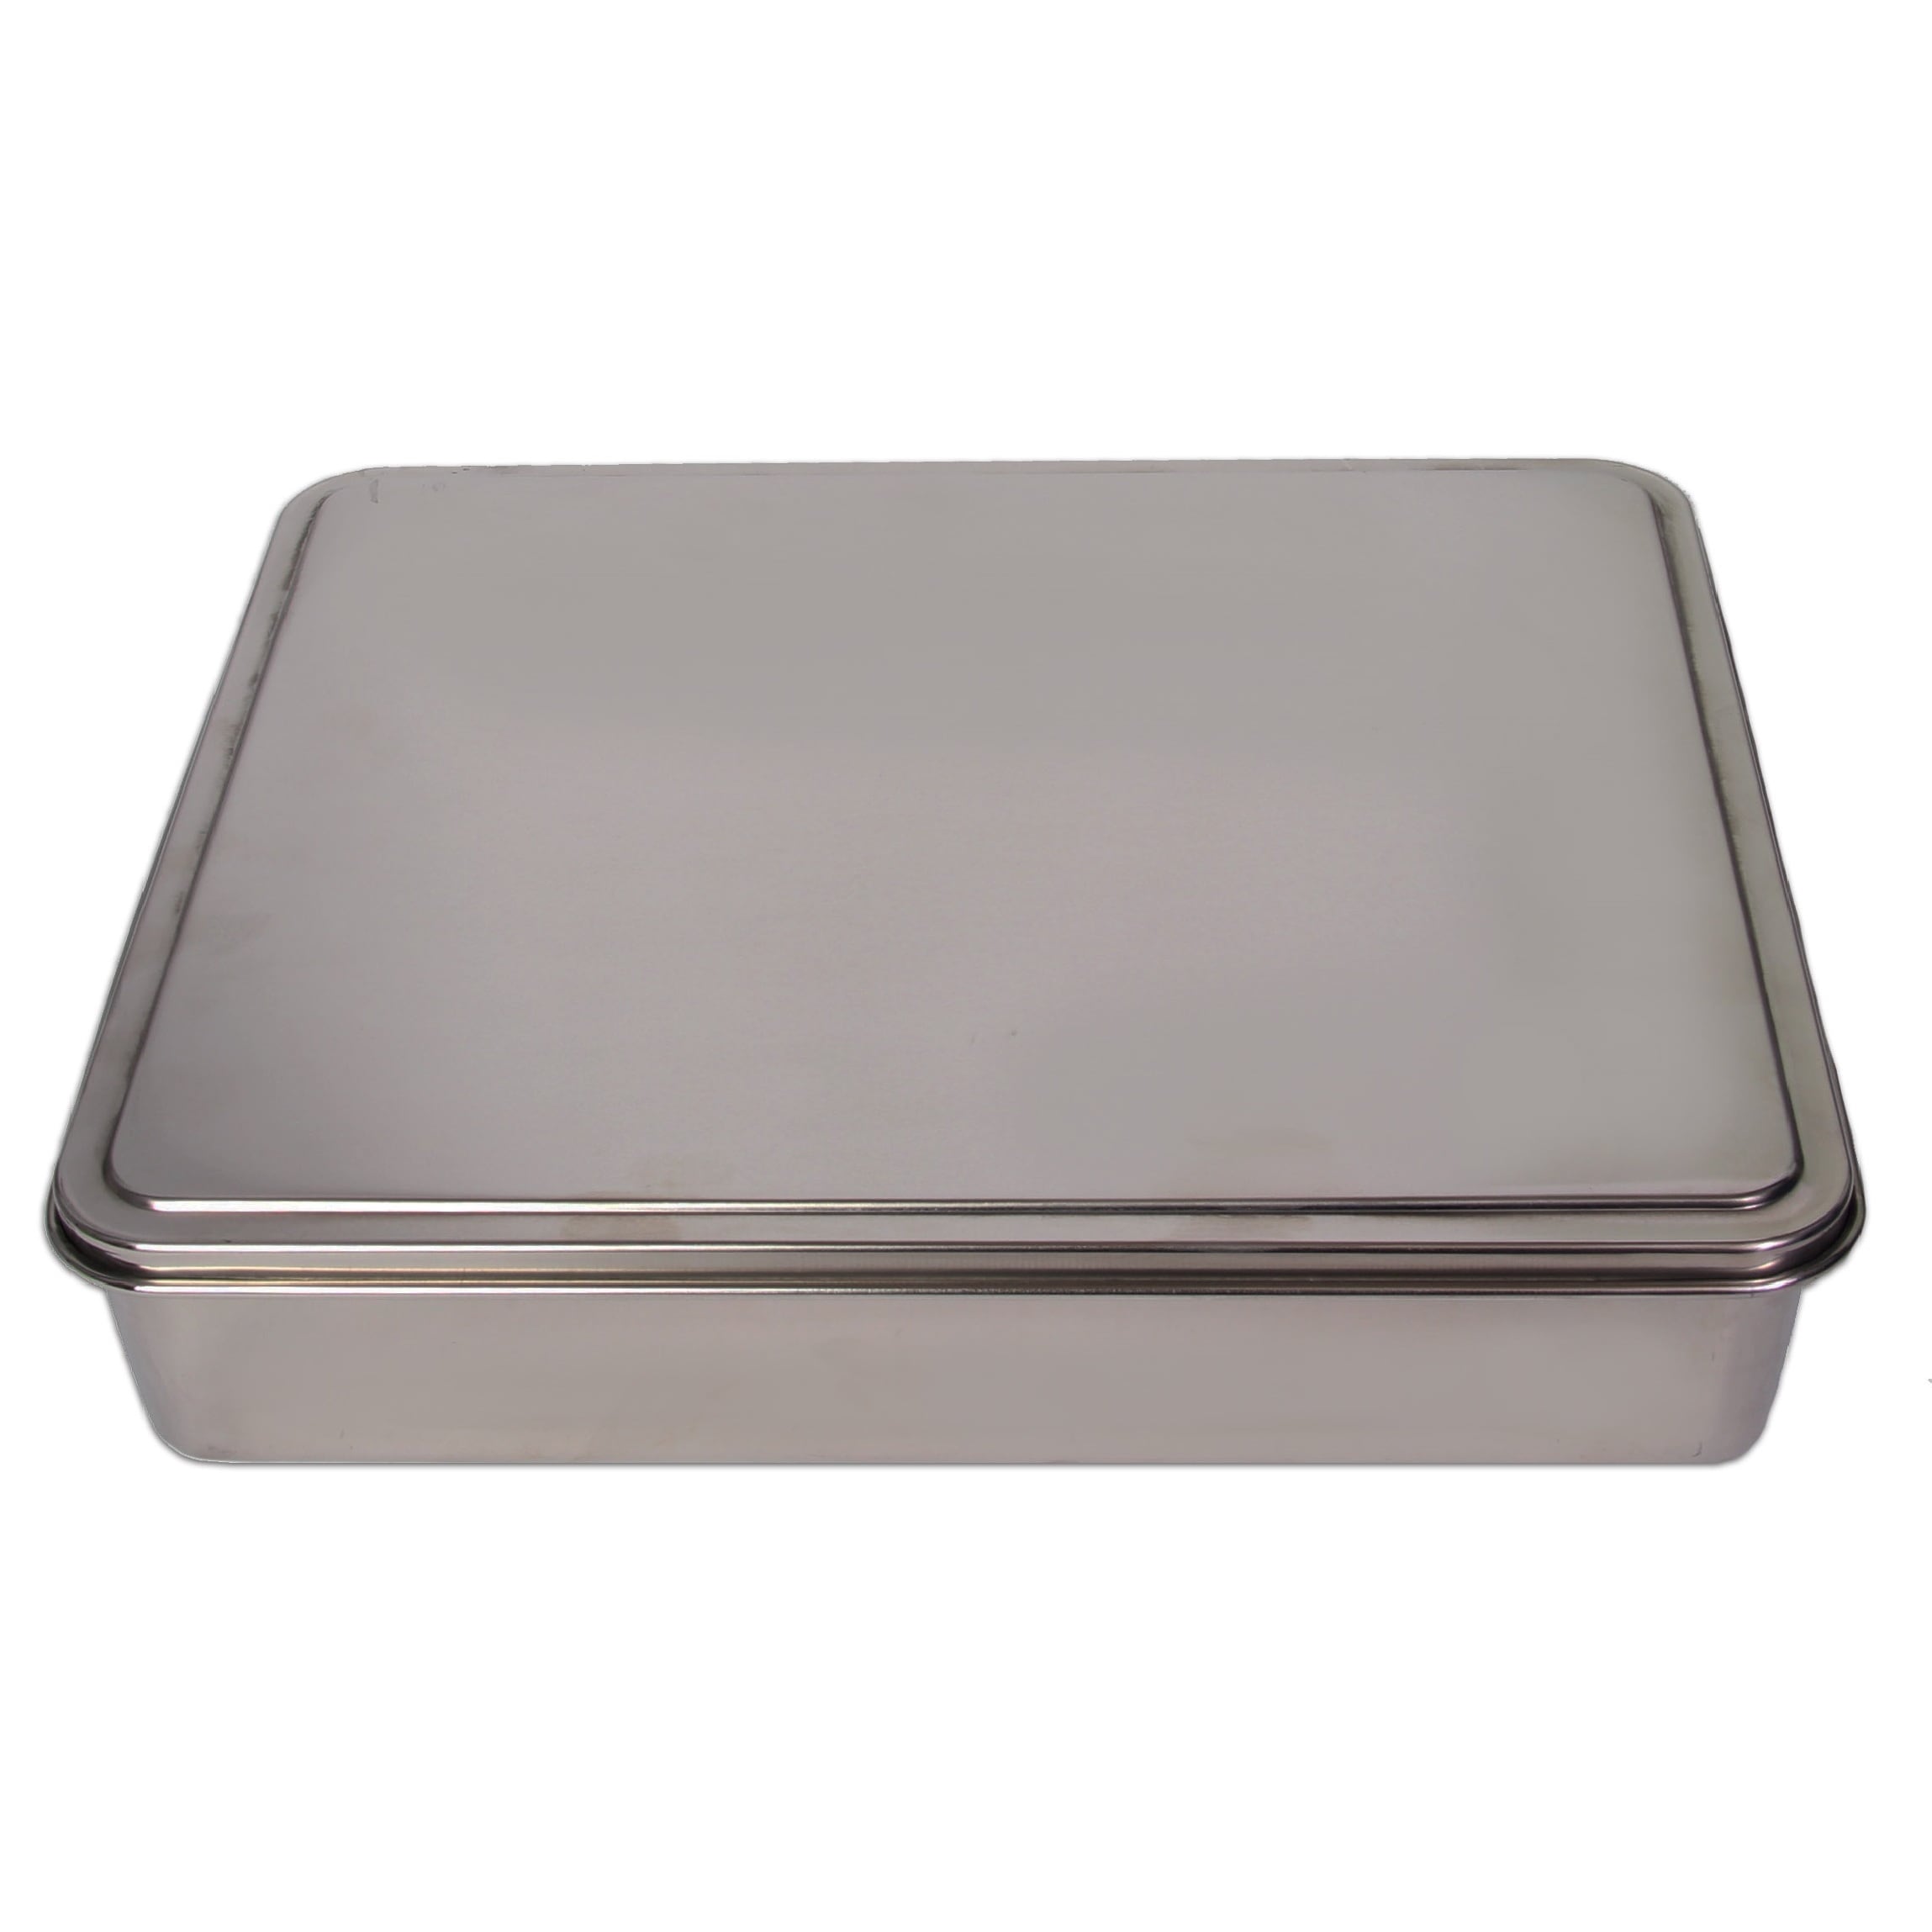 YBM Home Stainless Steel Covered Cake Pan - Silver - On Sale - Bed Bath &  Beyond - 12407091